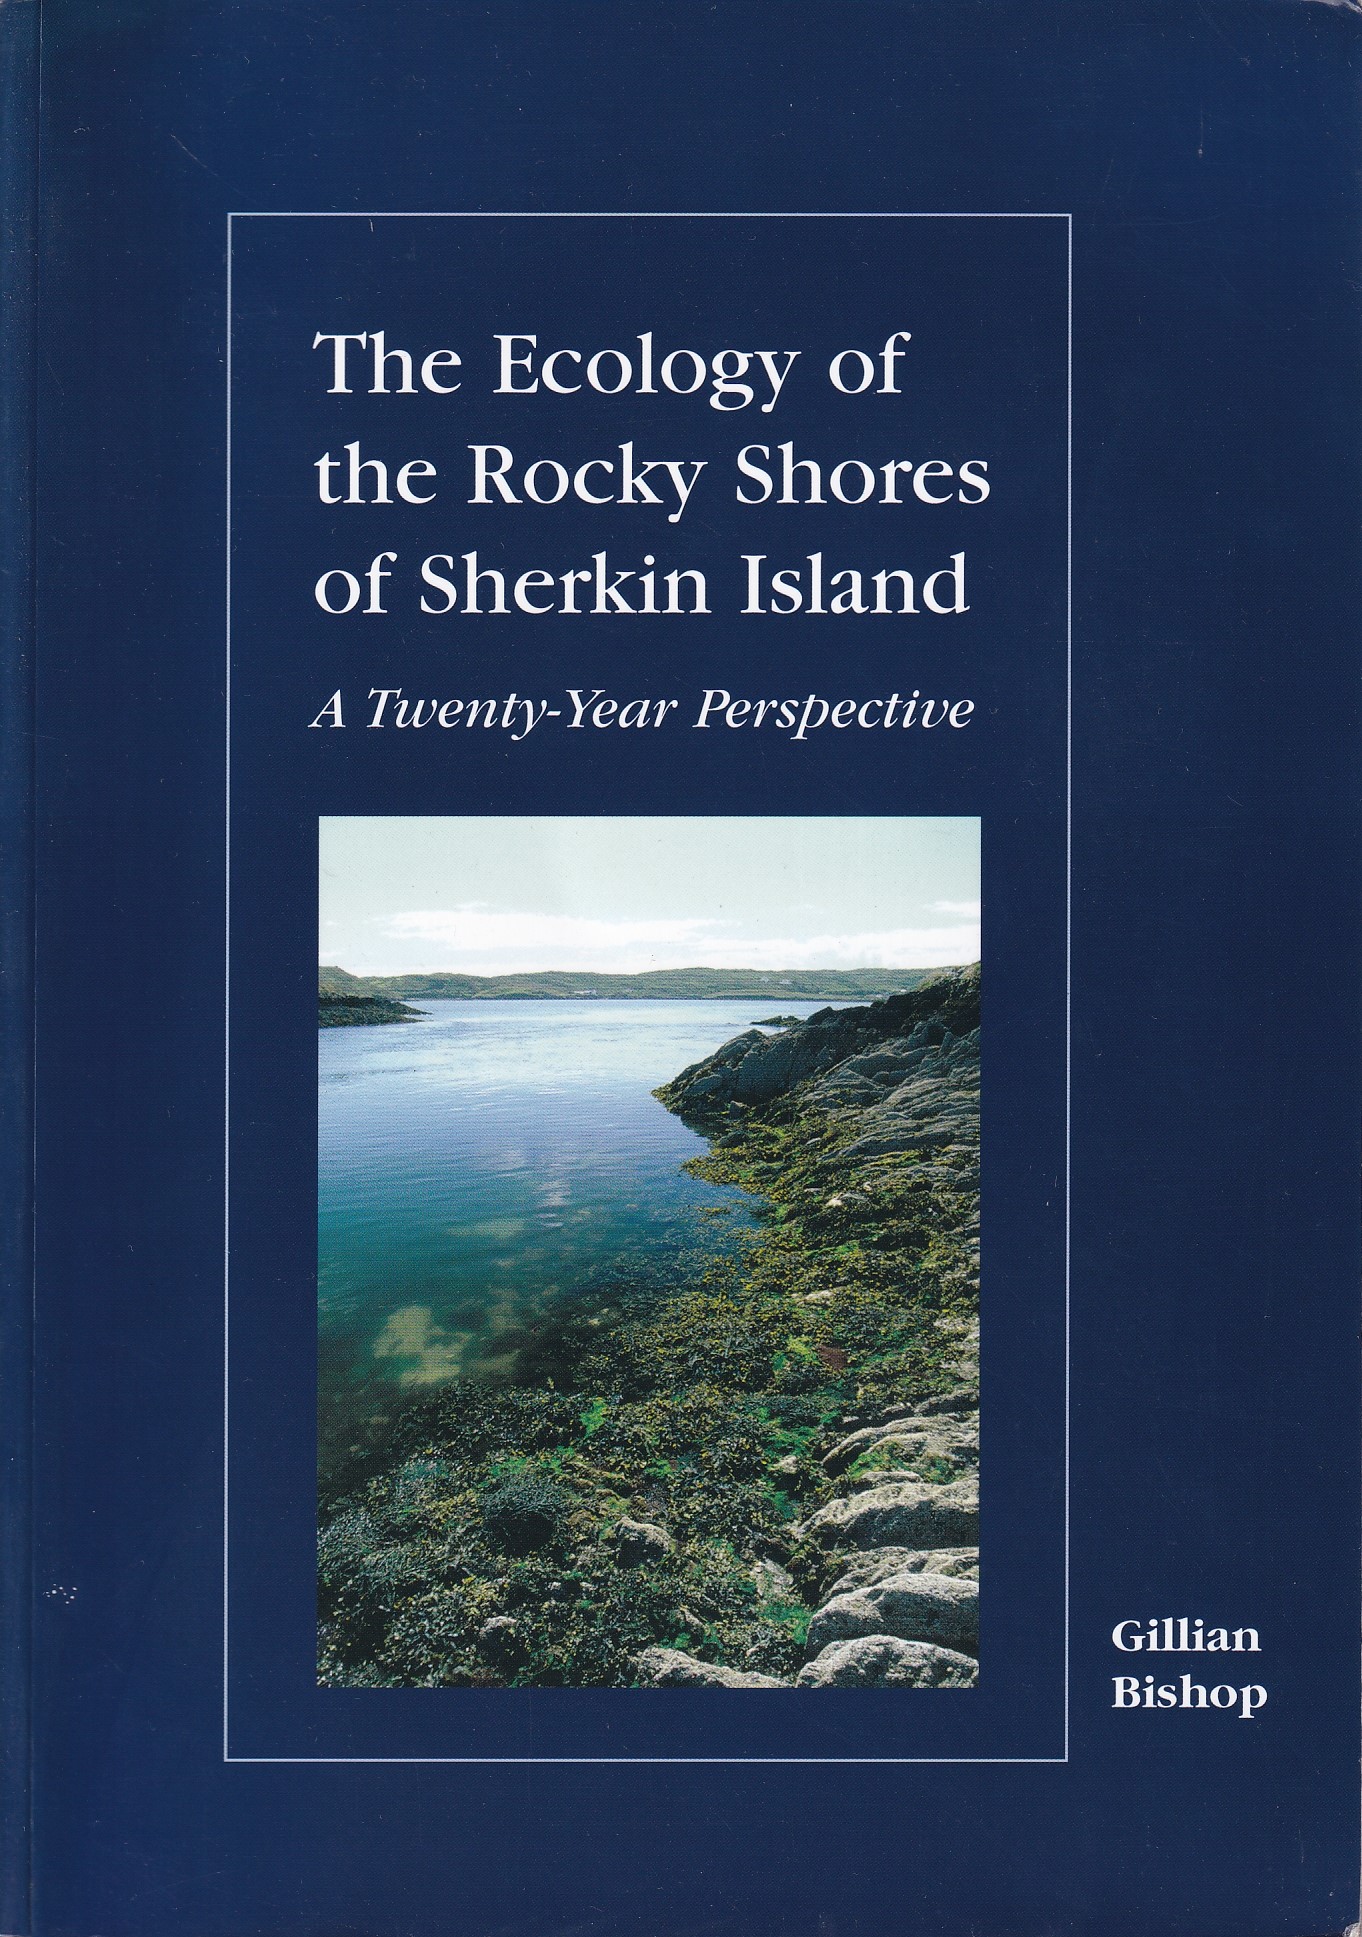 The Ecology of the Rocky Shores of Sherkin Island: A Twenty-Year Perspective | Bishop, Gillian | Charlie Byrne's